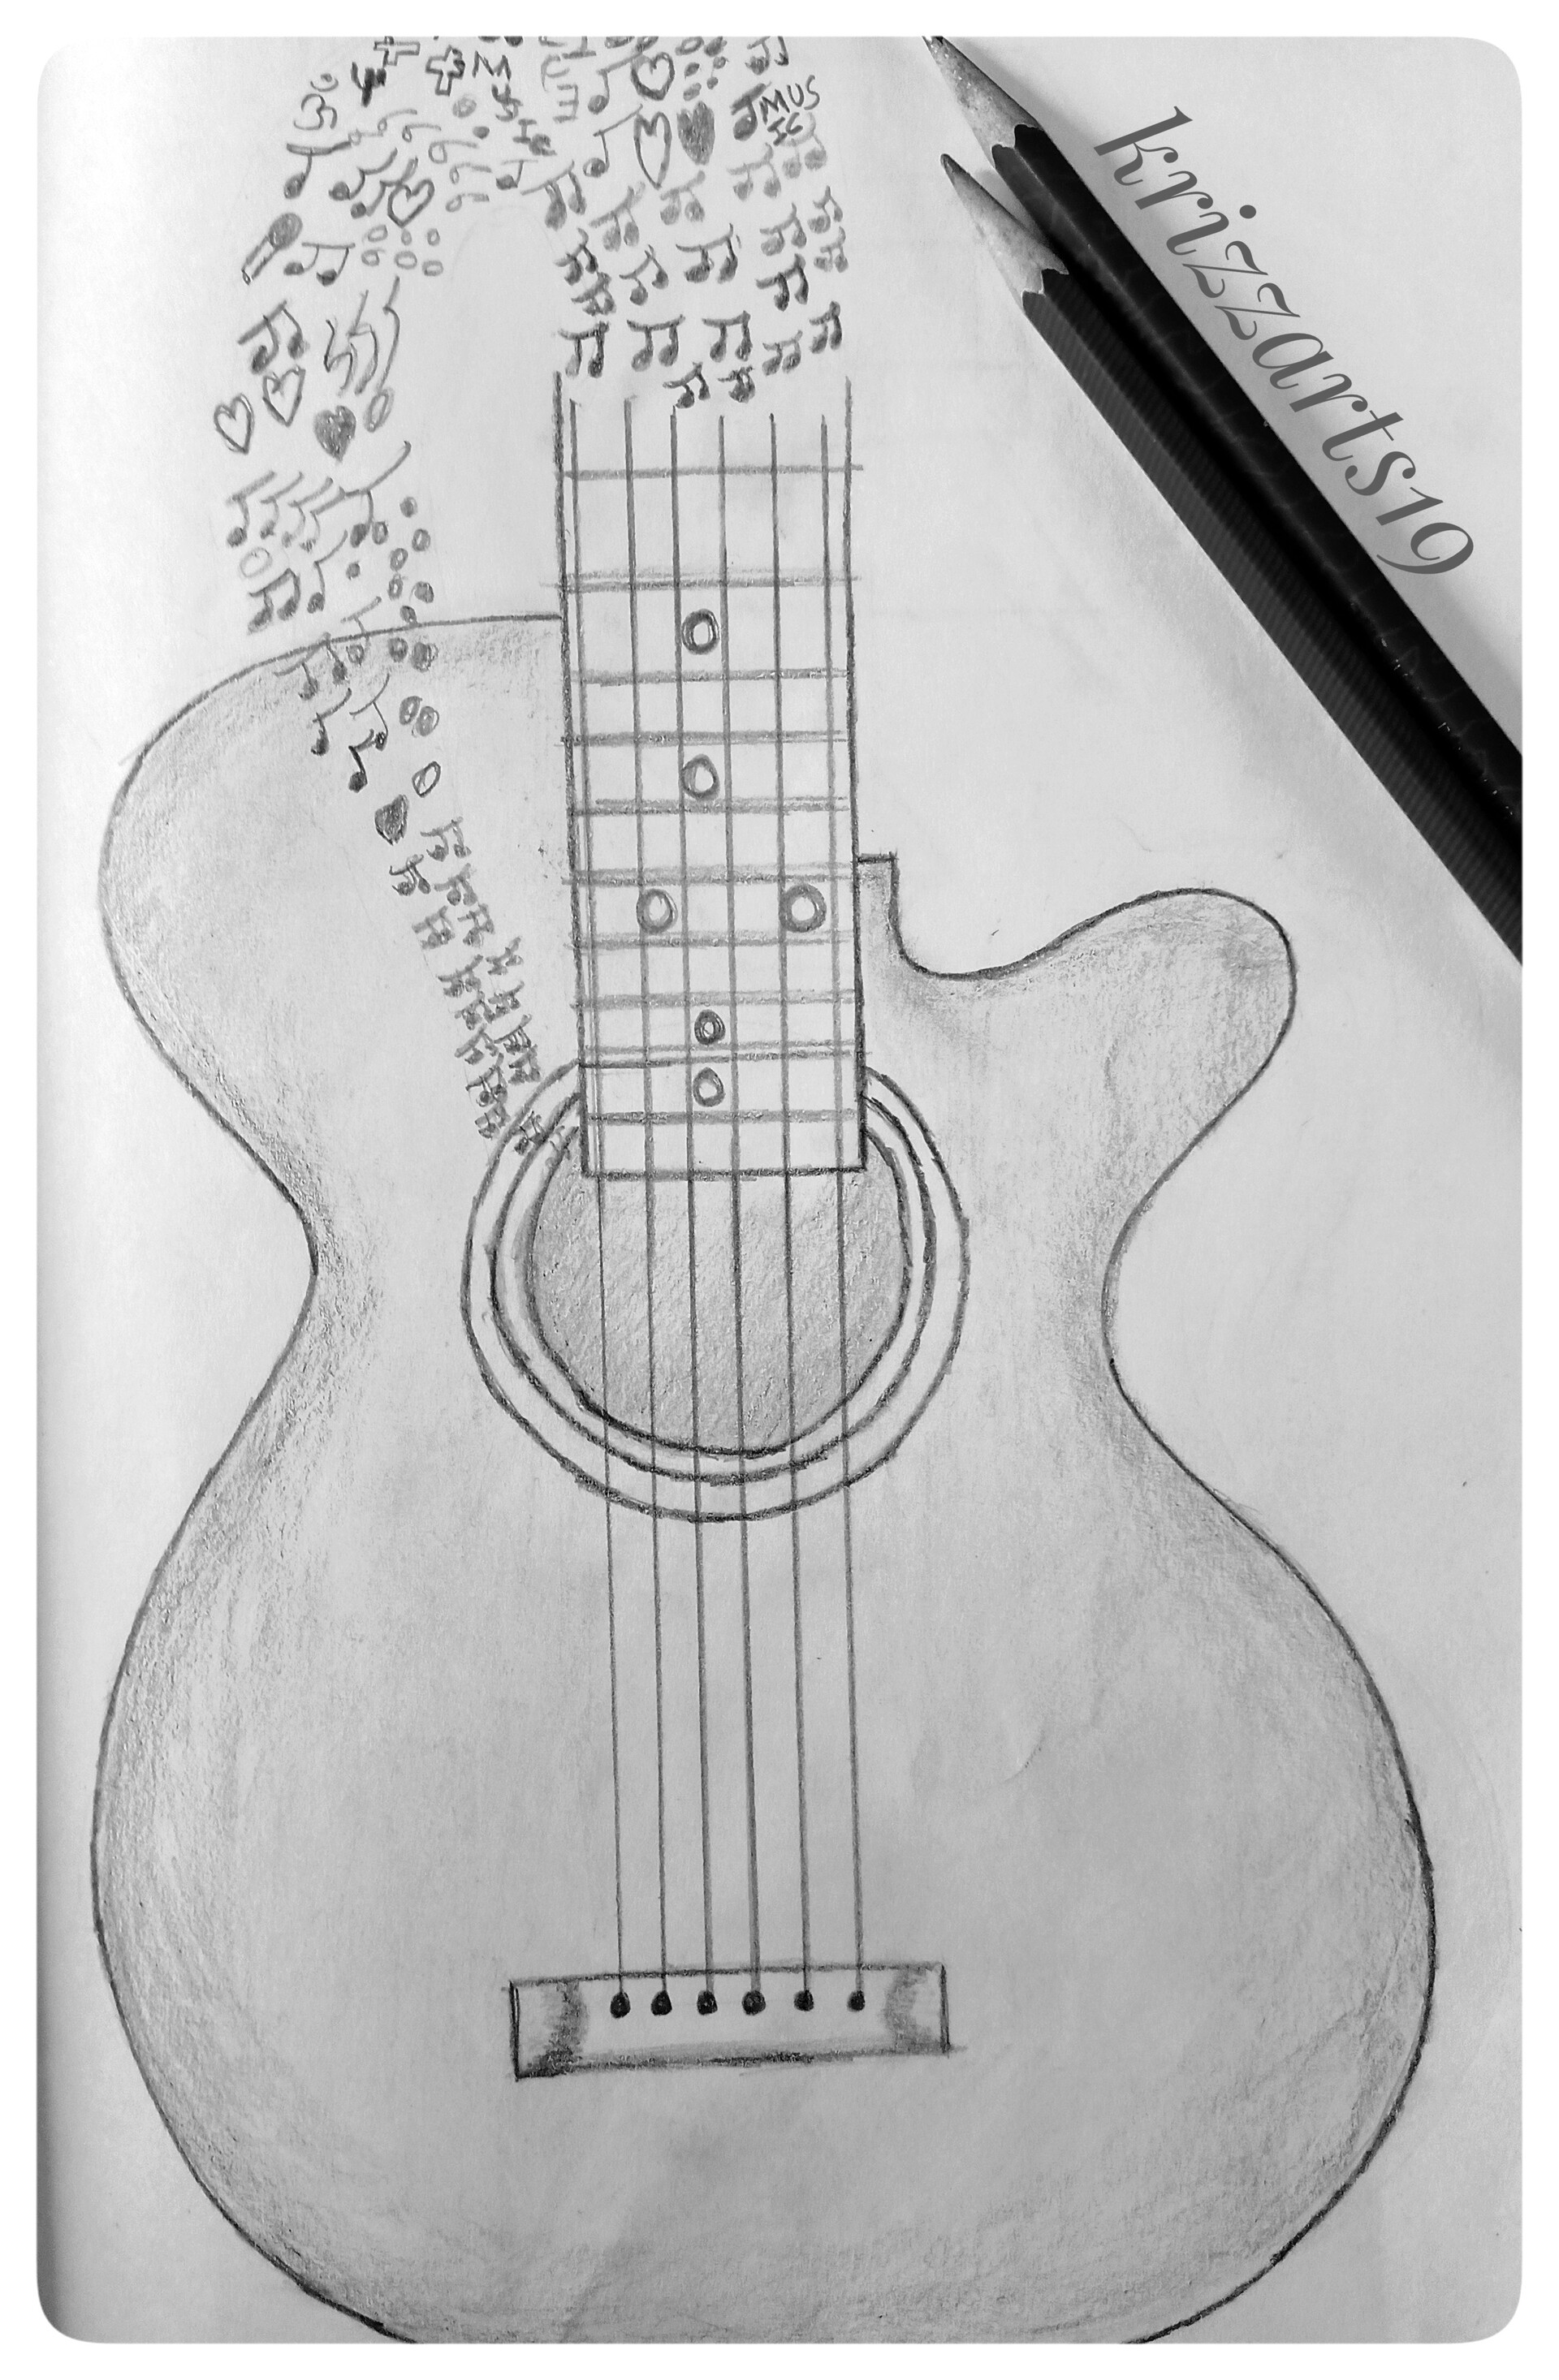 How to Draw a Guitar - Create a Realistic Drawing of a Guitar